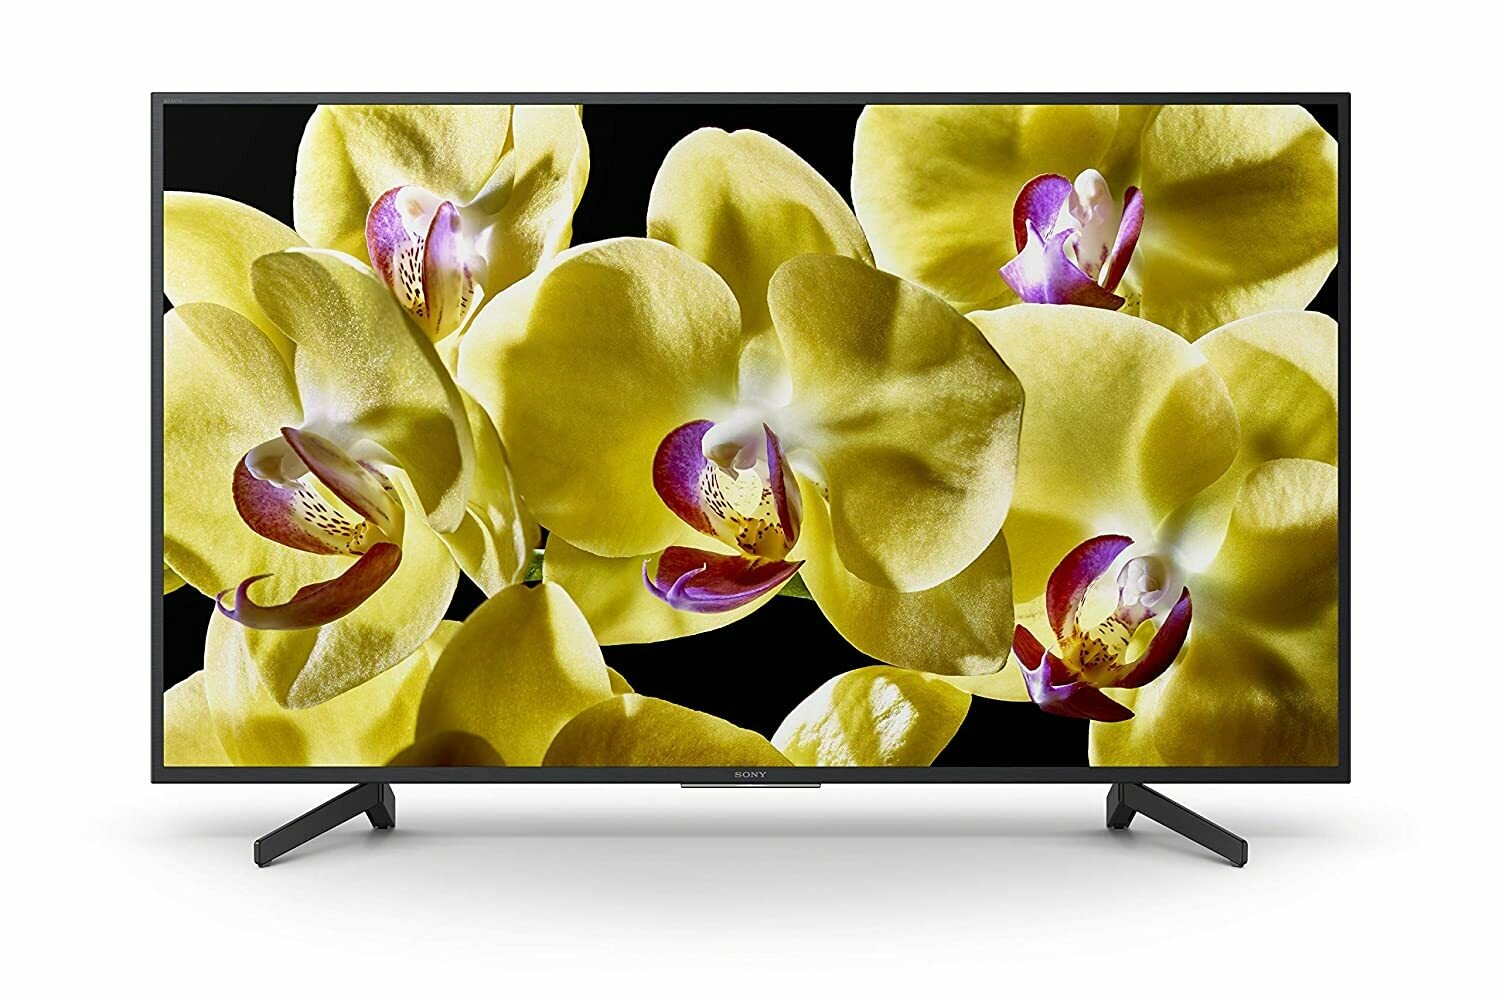 Sony Bravia 163.9 cm (65 inches) 4K UHD Certified Android LED TV KD-65X8000G